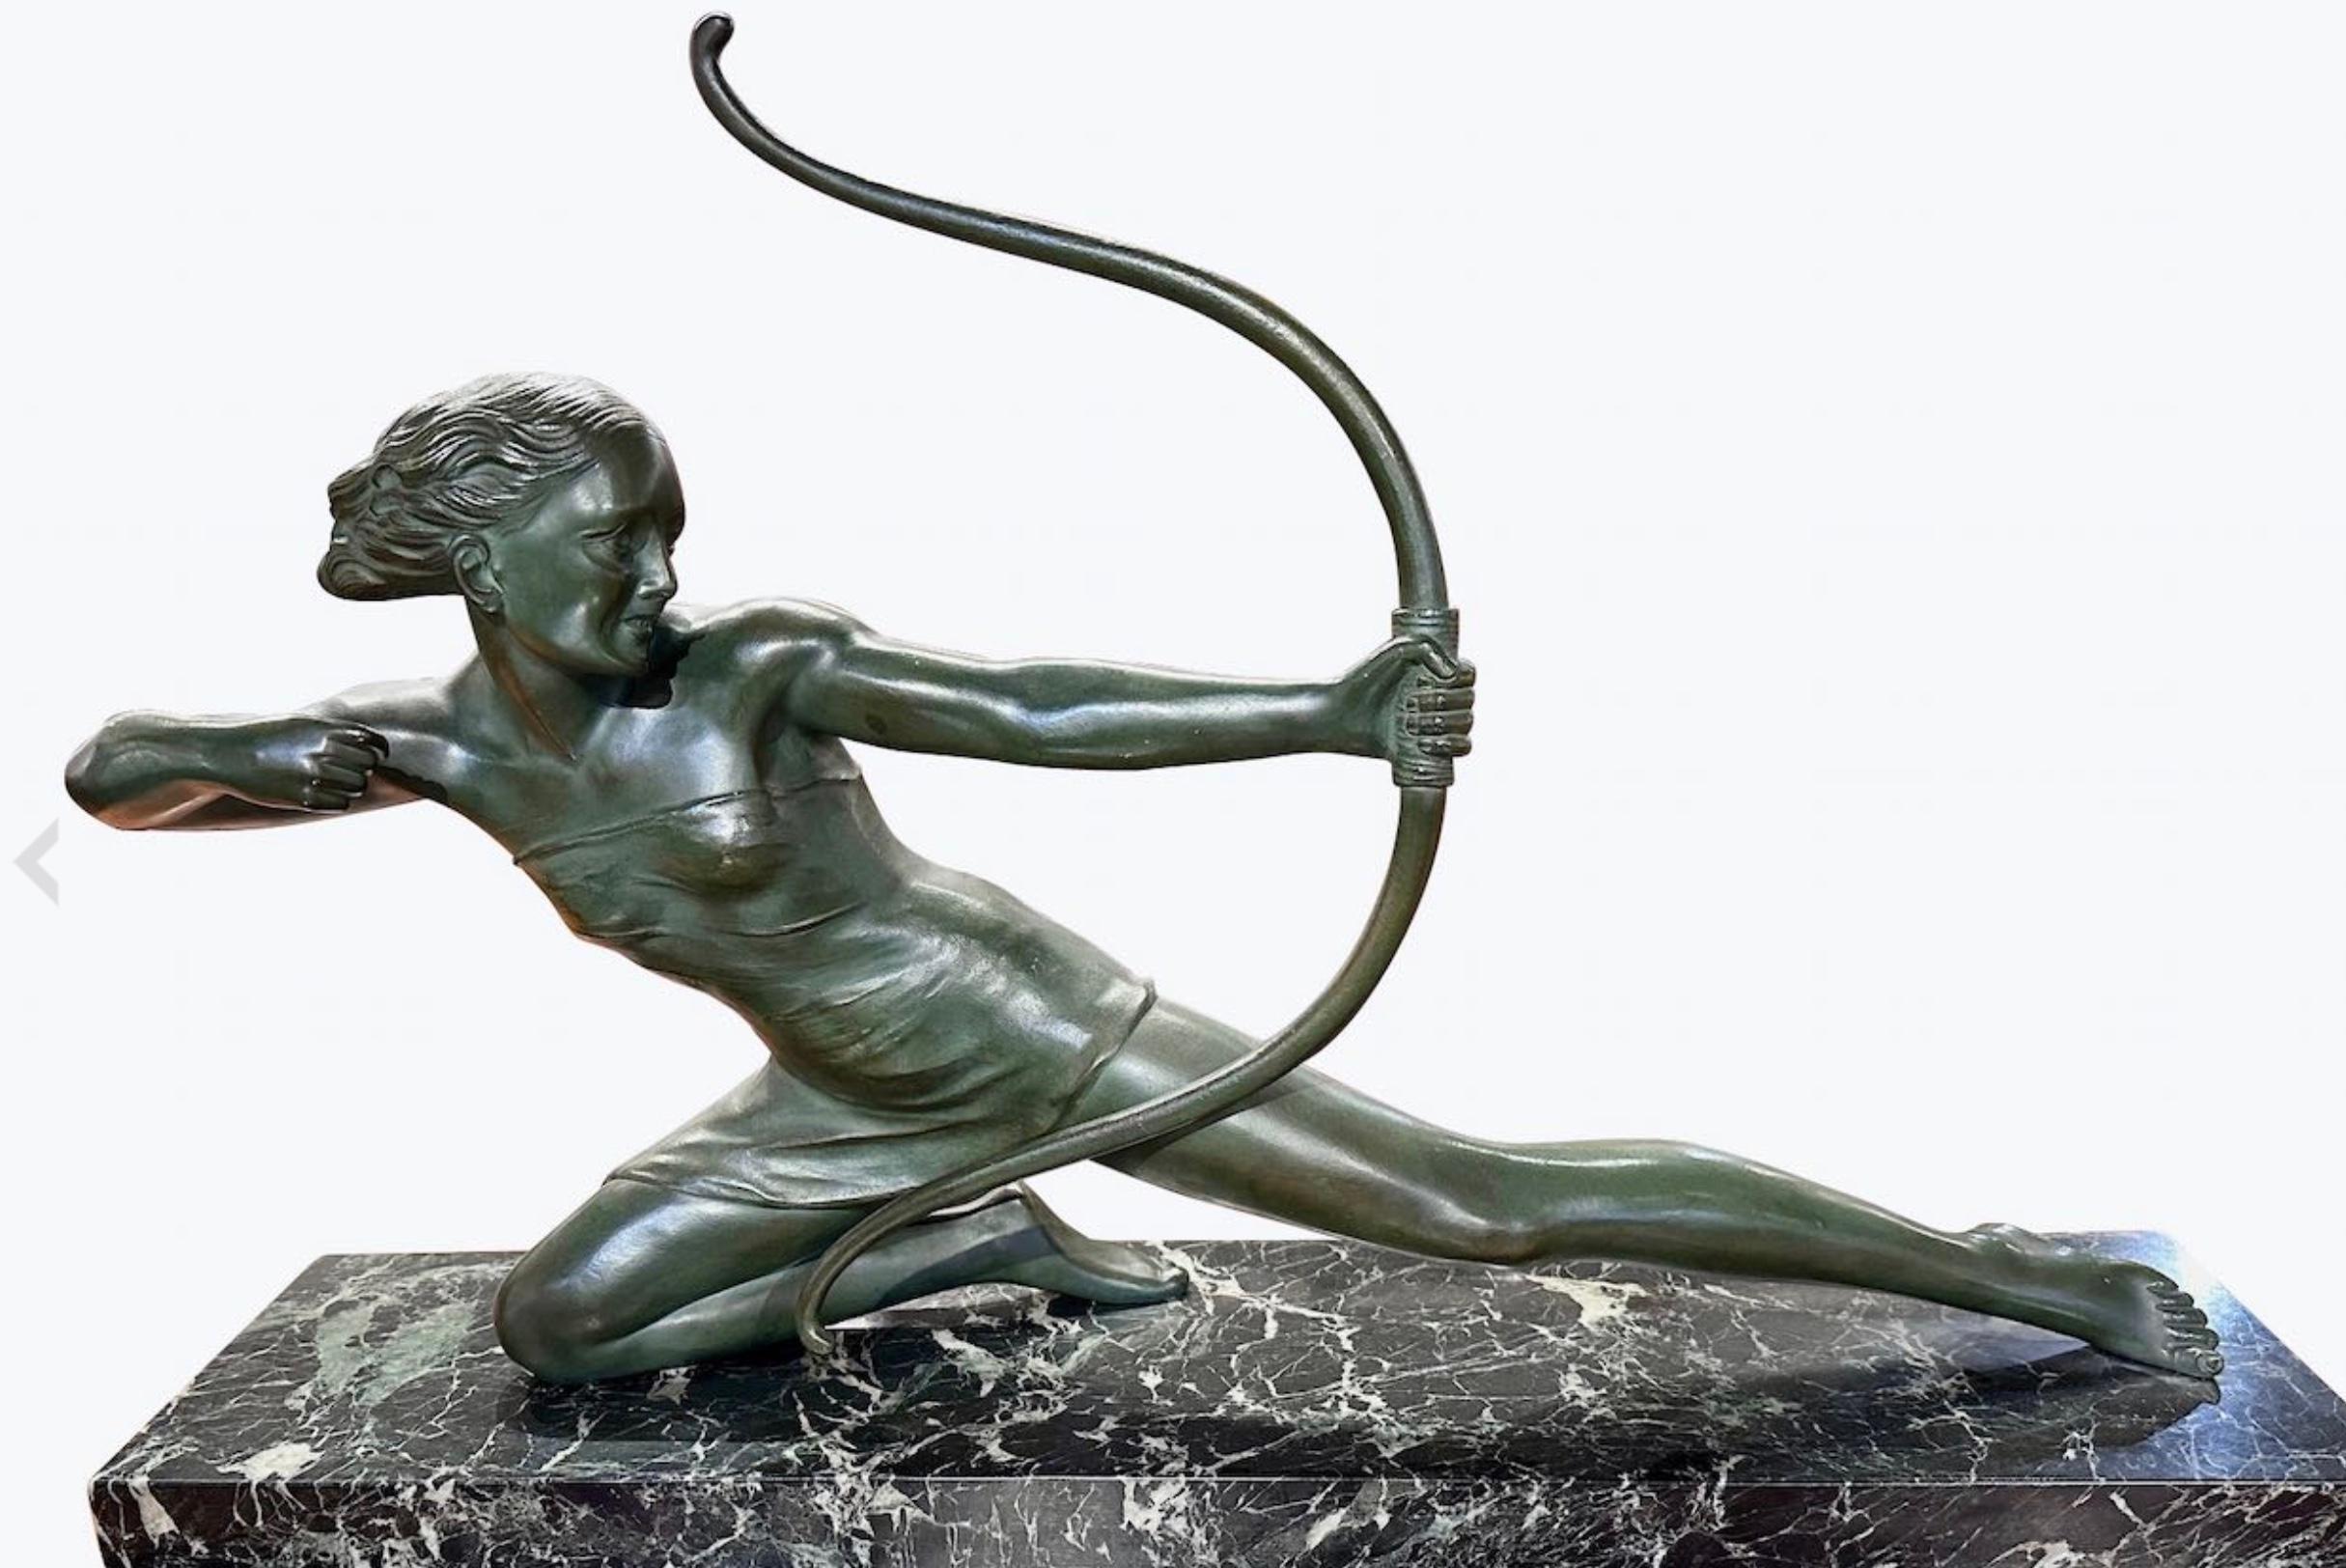 French Art Deco Diana the Huntress Bronze by S. Melanie 1930s, crafted in the 1930s, stands as a testament to the artistic brilliance of the era. This extraordinary sculpture exudes a commanding presence through its size, weight, and the dynamic